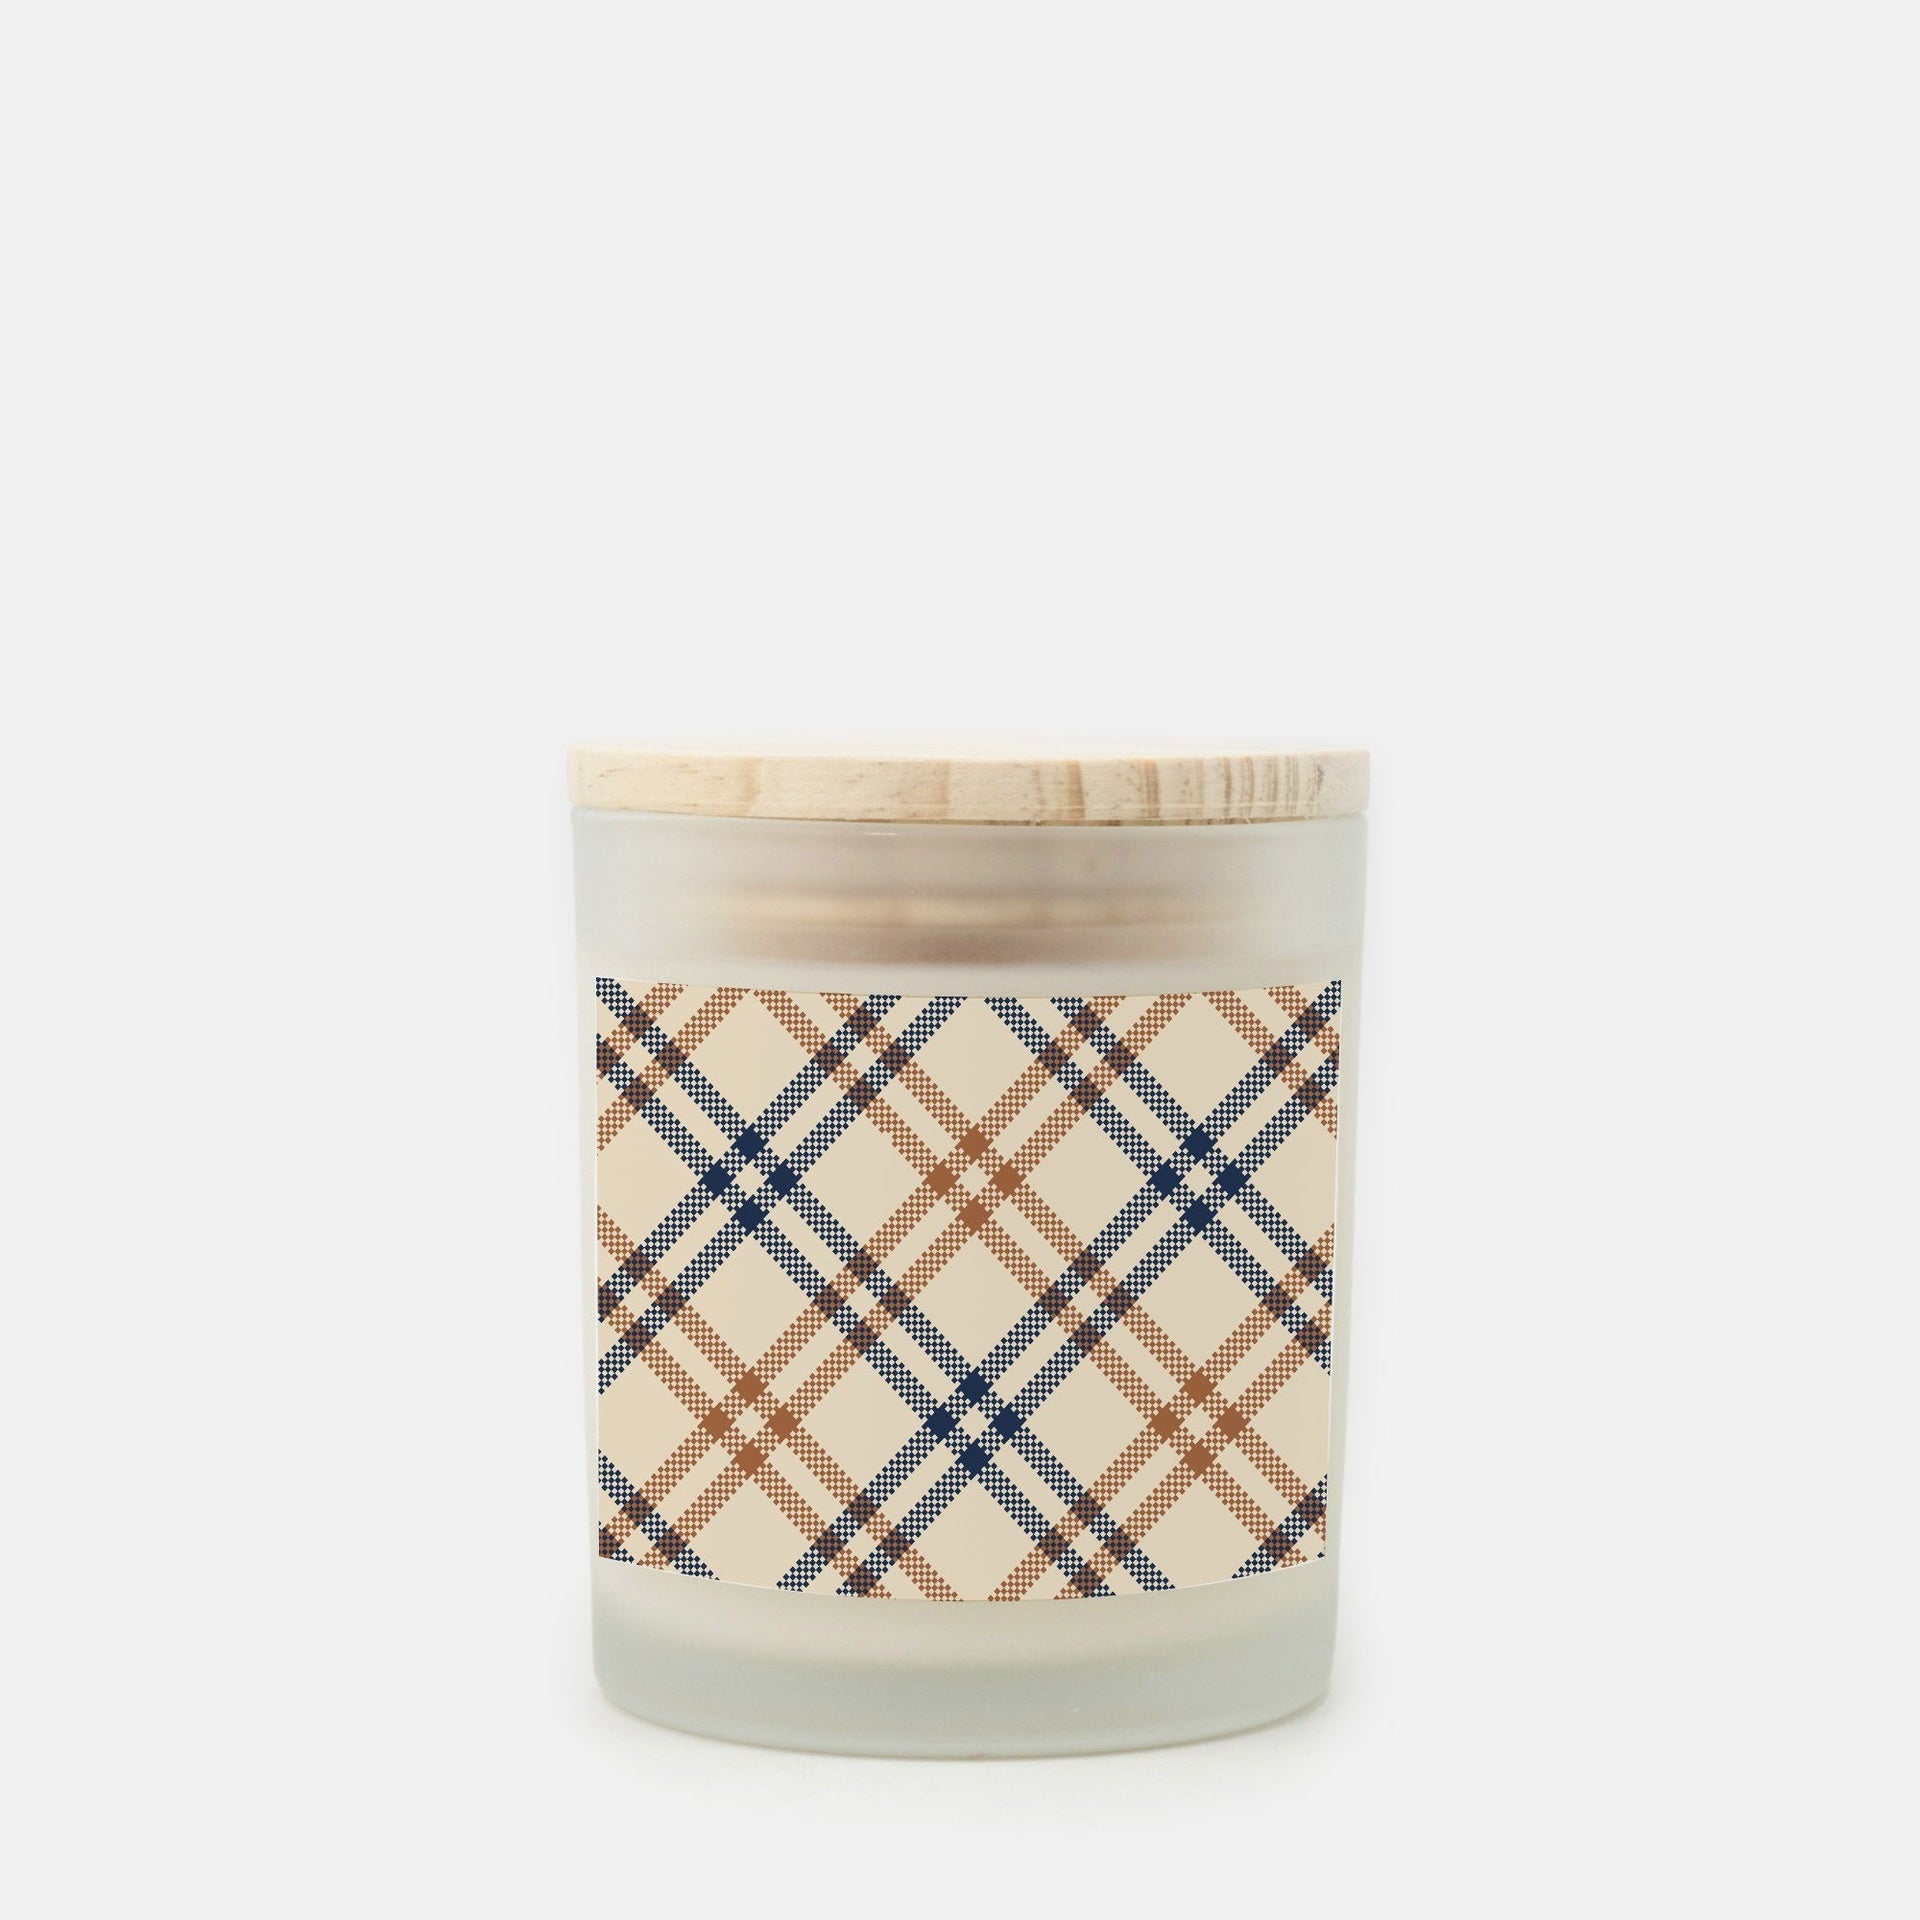 Lifestyle Details - 11oz Brown & Blue Diagonal Plaid Frosted Glass Candle - Cashmere Vanilla